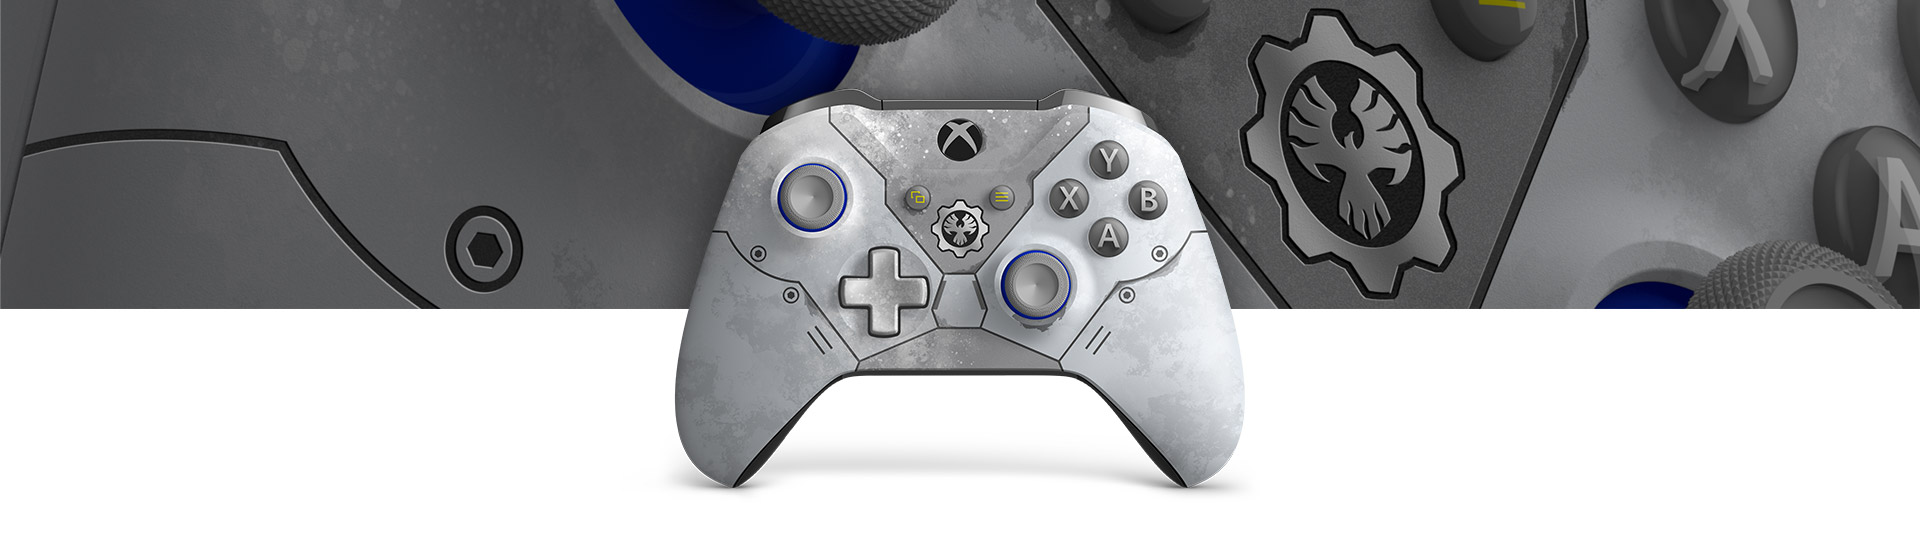 xbox one gears 5 limited edition wireless controller